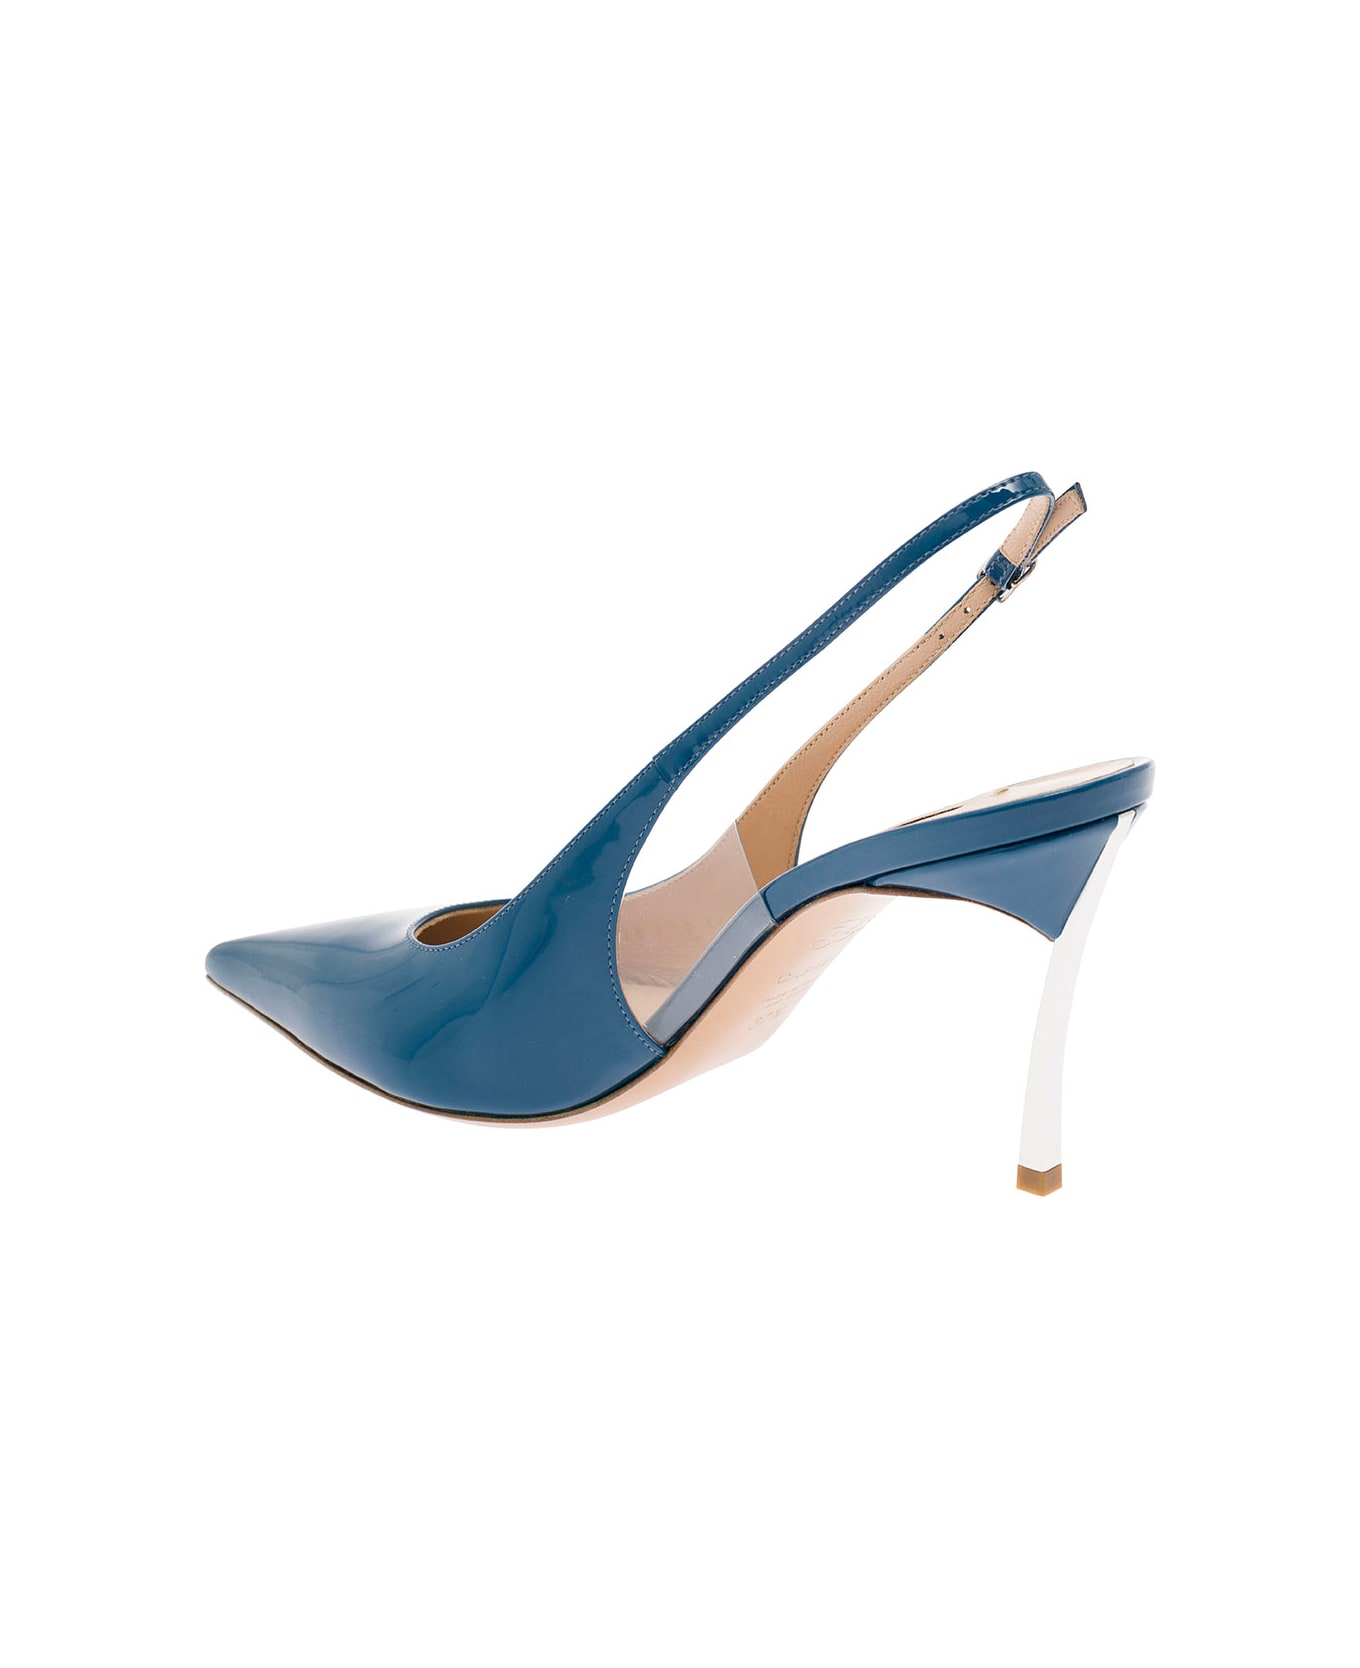 Casadei Light Blue Slingback Pumps With Blade Heel In Patent Leather Woman - Blu ハイヒール